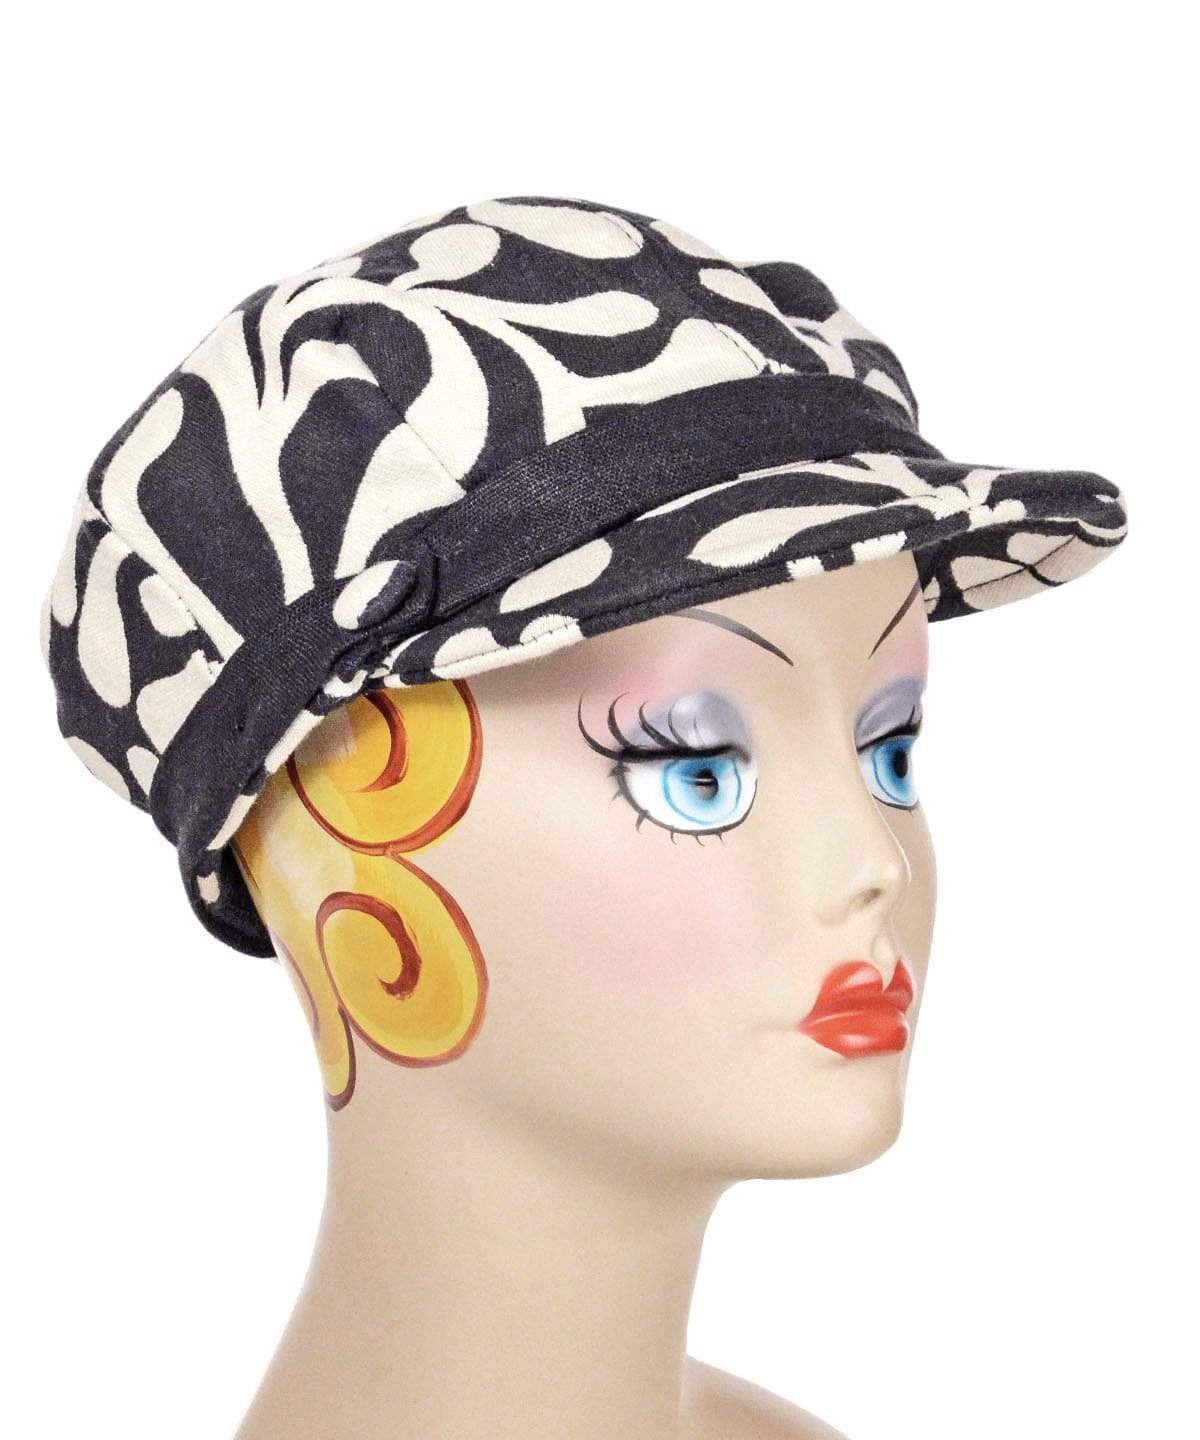 Woman wearing Valerie Cap Style | Black Pepper Paisley Upholstery Fabric | Satin Bow Trim with Black Linen Band | Handmade in Seattle WA USA |Pandemonium Millinery |